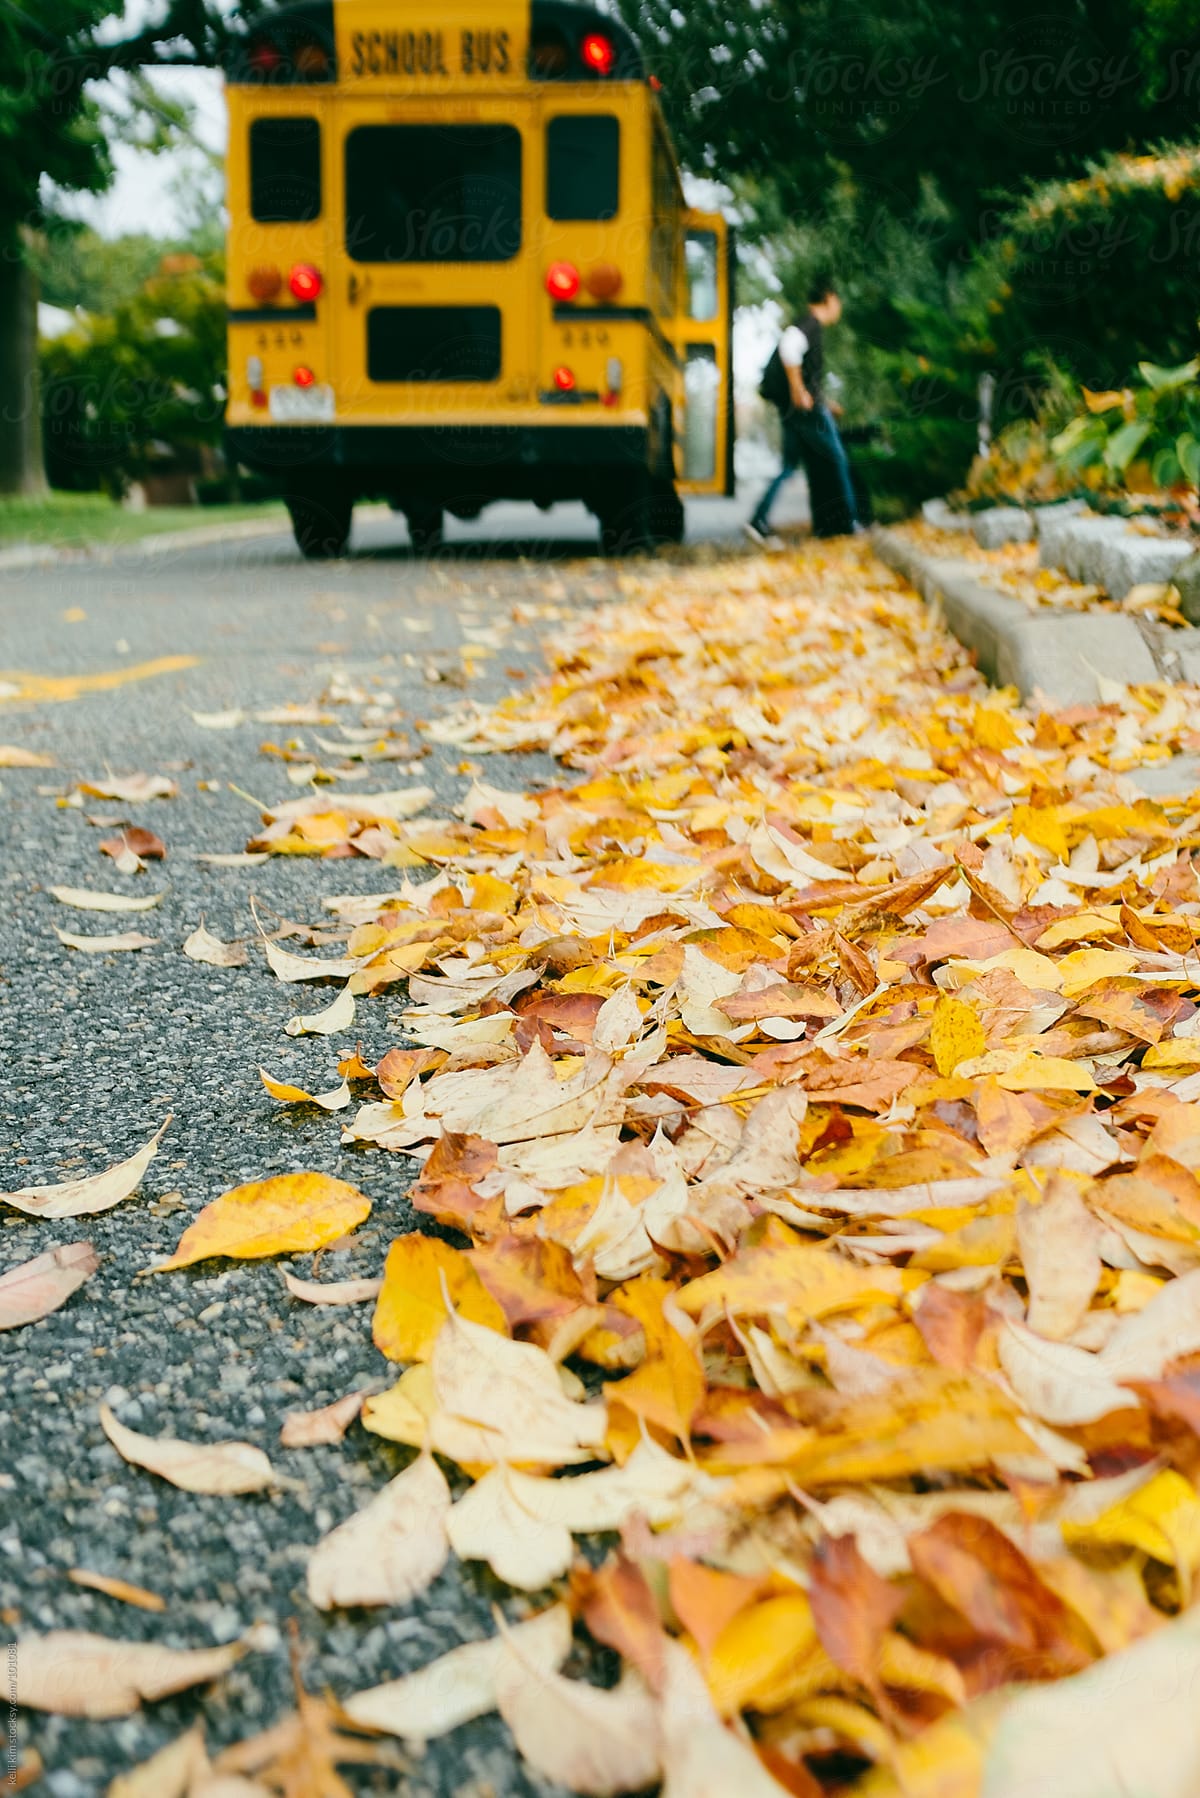 Male Student Exits School Bus On Autumn Leaf Covered Street